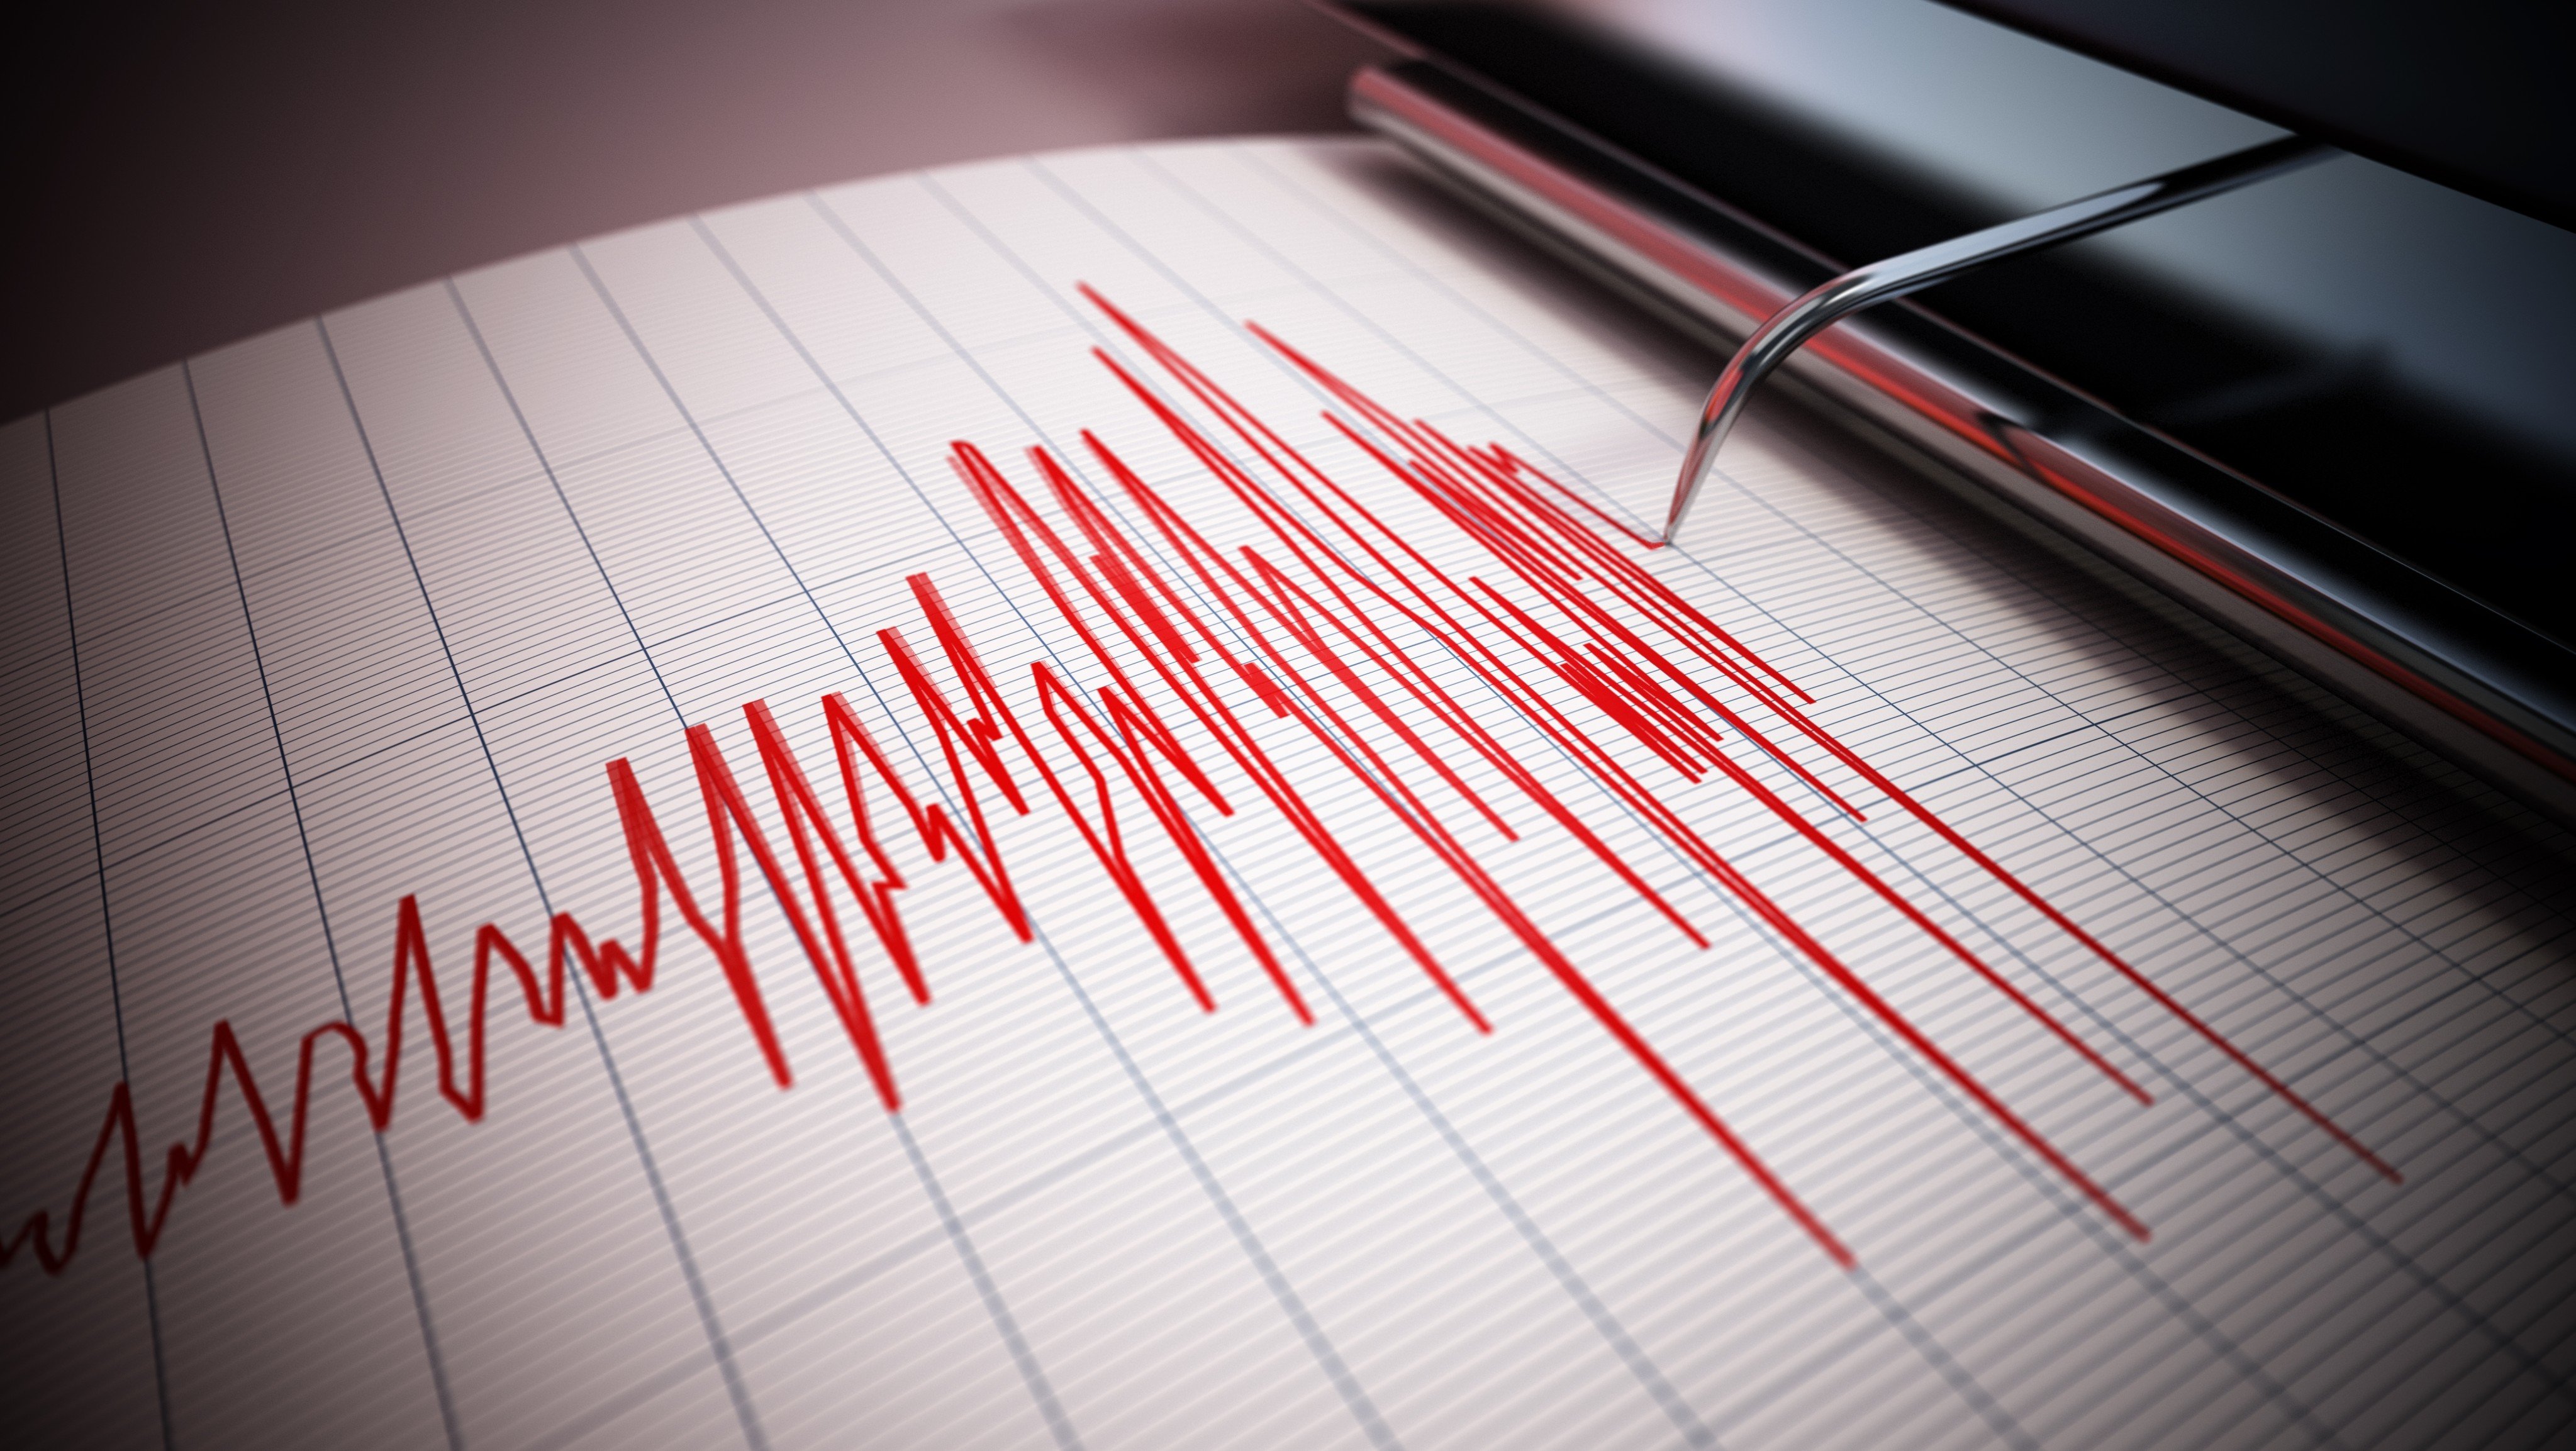 Hong Kong most recently felt tremors from a 5-magnitude earthquake about 350km east-northeast from the city that occurred in the sea off Shantou in Guangdong on October 23. Photo: Shutterstock